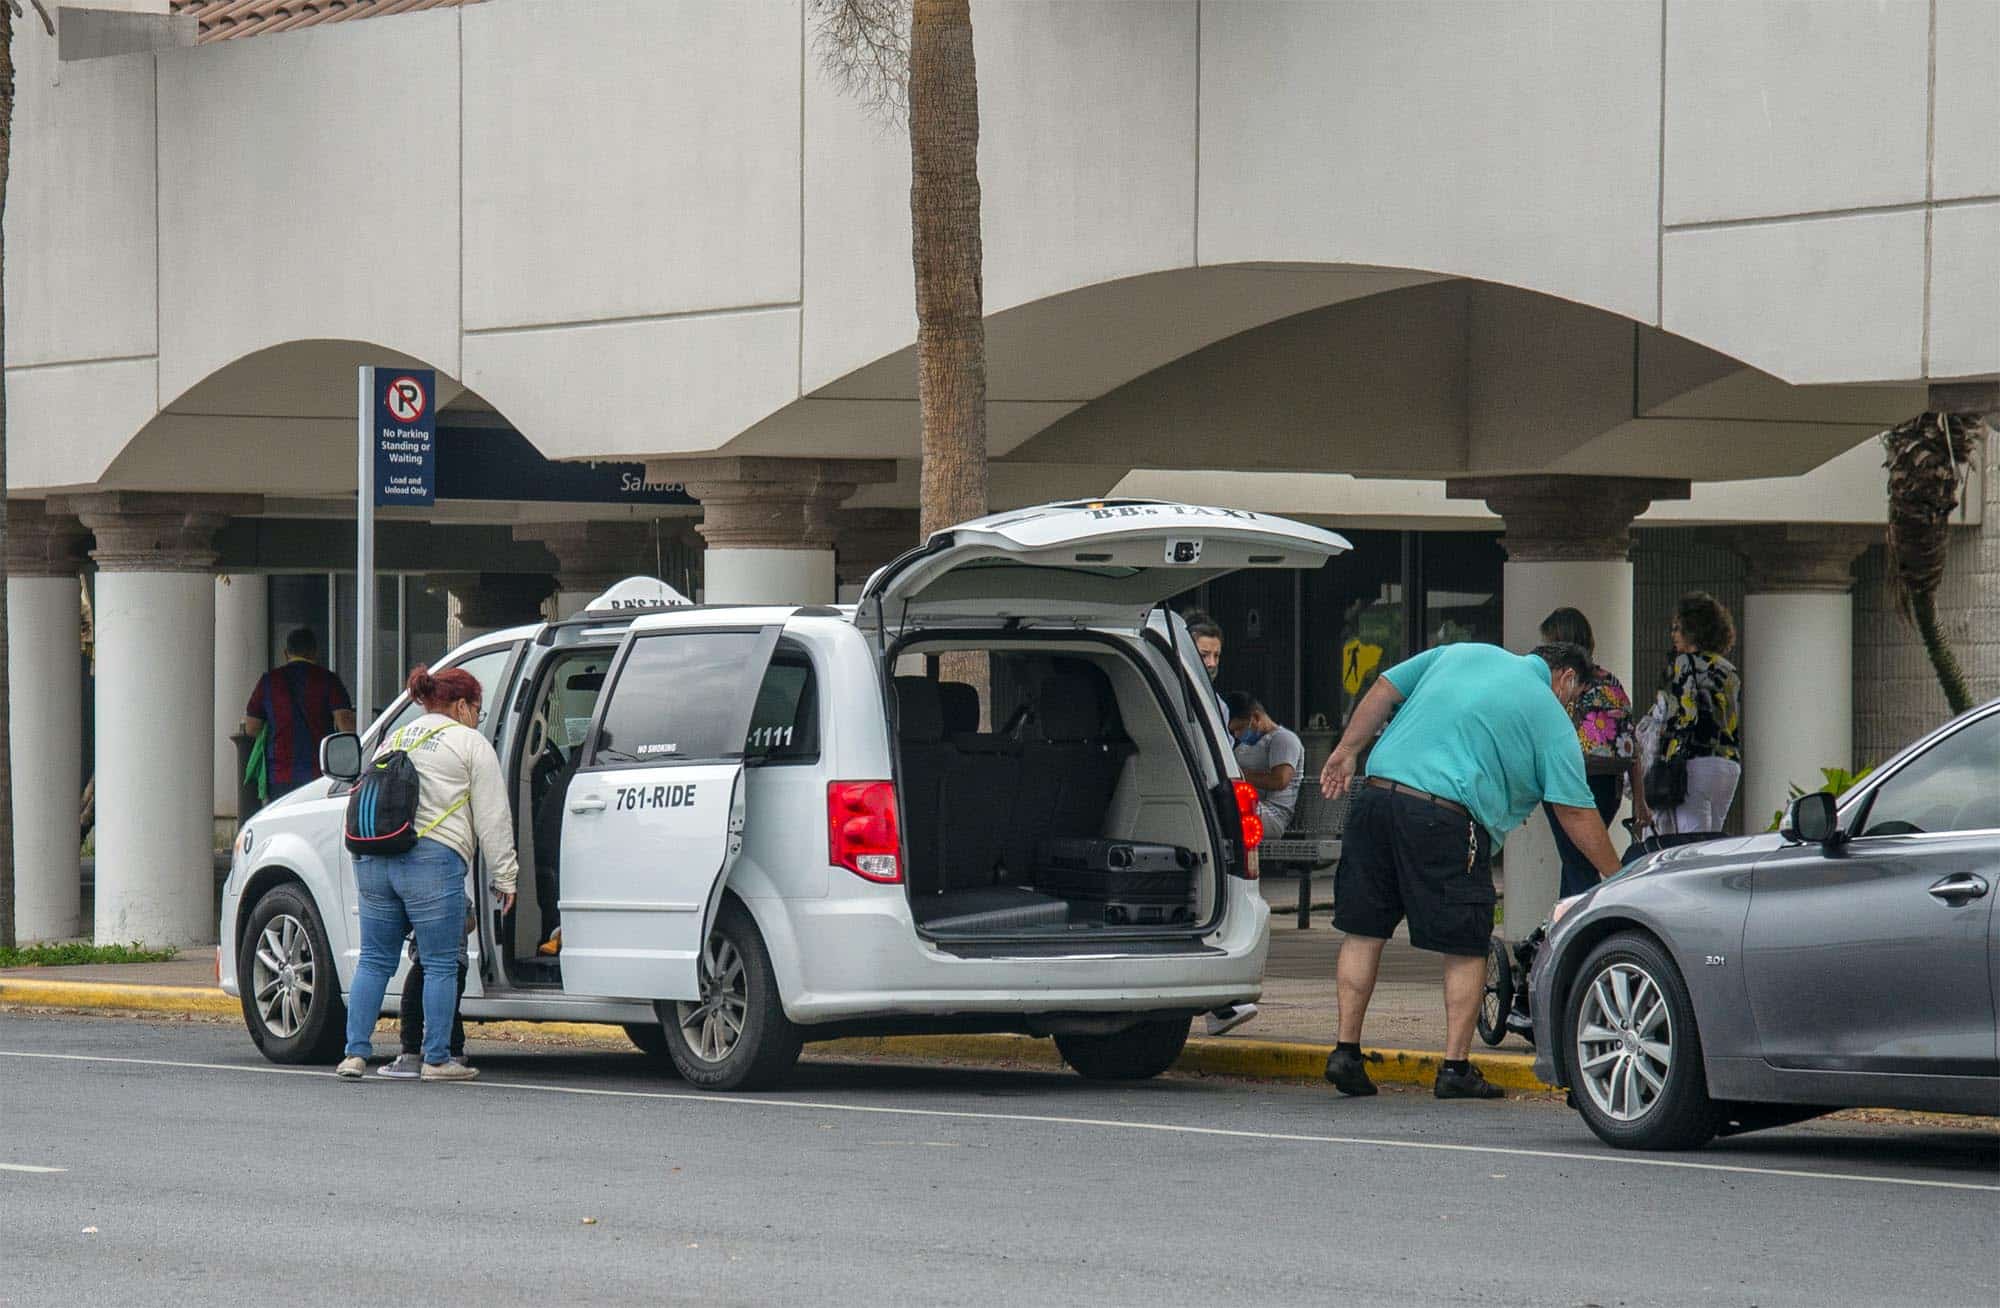 Passengers arrive at Valley International Airport in Harlingen this past week via taxi. The onset of the coronavirus pandemic last year led to less airport traffic causing Valley International Airport's exclusive taxi service to leave town. Now local taxi services as well as several taxi companies from South Padre Island are providing transportation services to airport customers. 